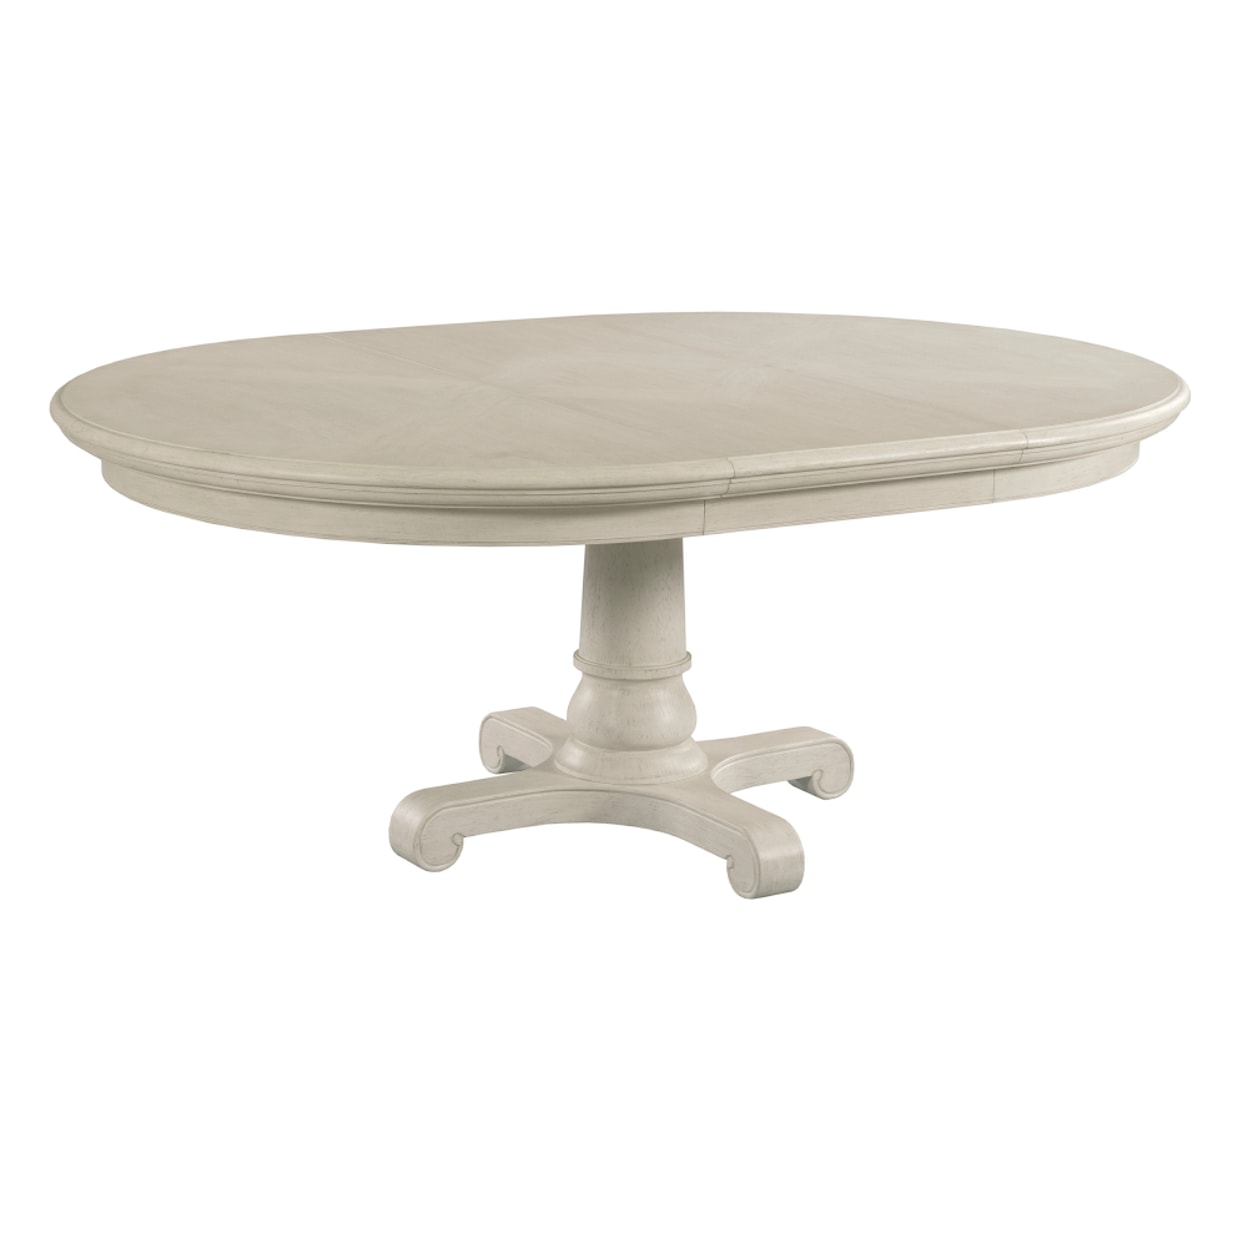 American Drew Grand Bay Caswell Round Dining Table